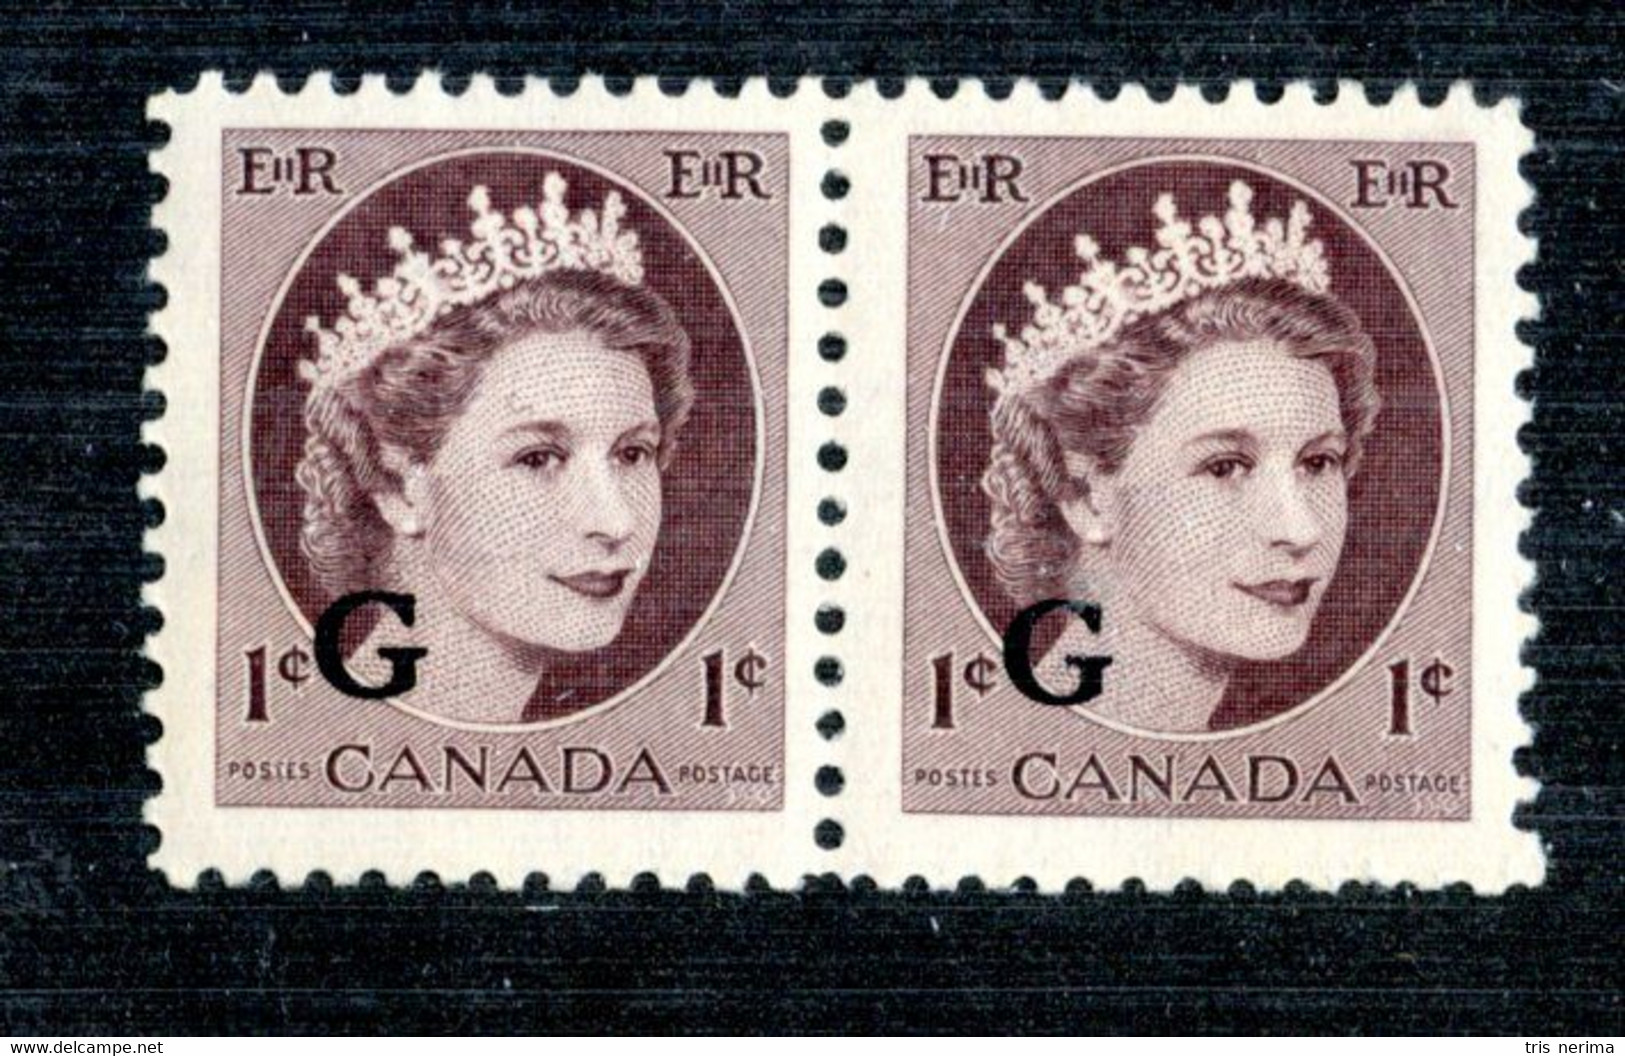 1581 Canada 1955 Scott O-40 Mnh** ( Cat.$3.00 Offers Welcome! ) - Overprinted